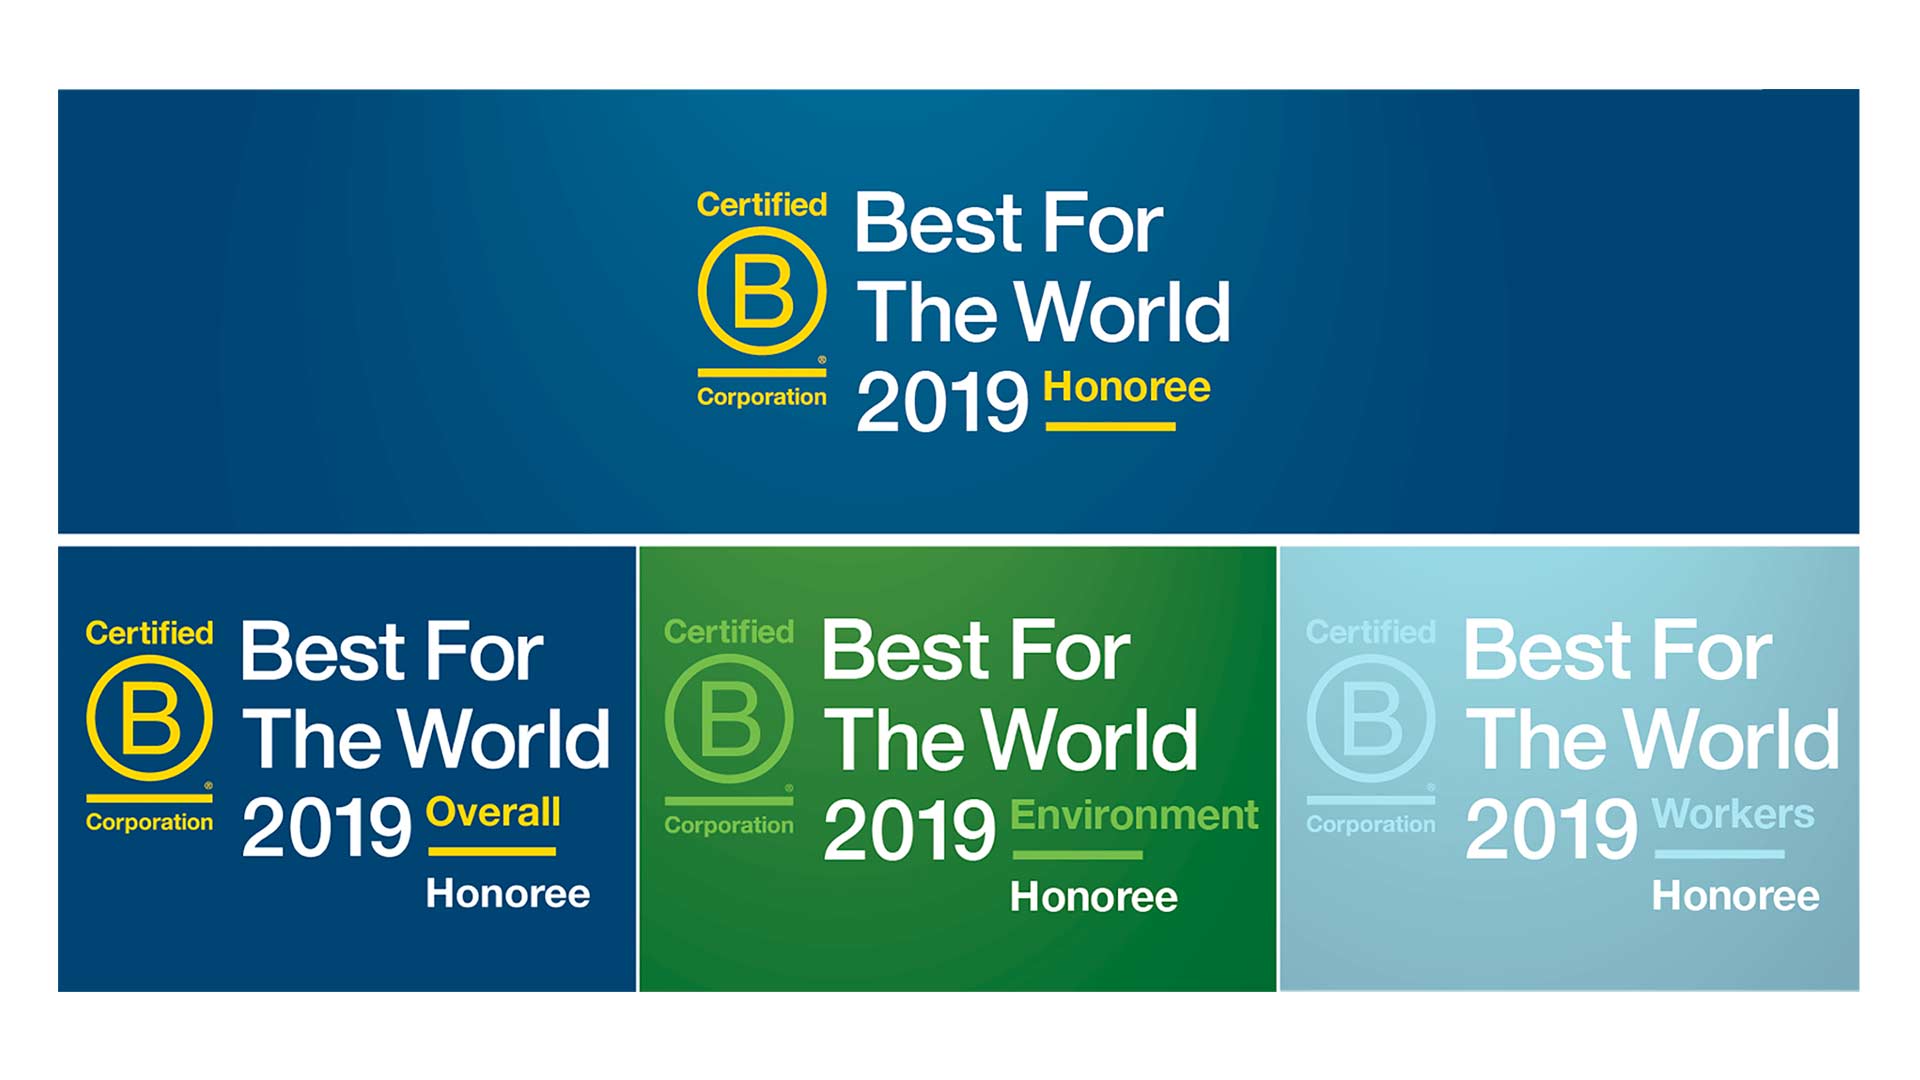 Goldman&Partners B Corp Best For The World 2019